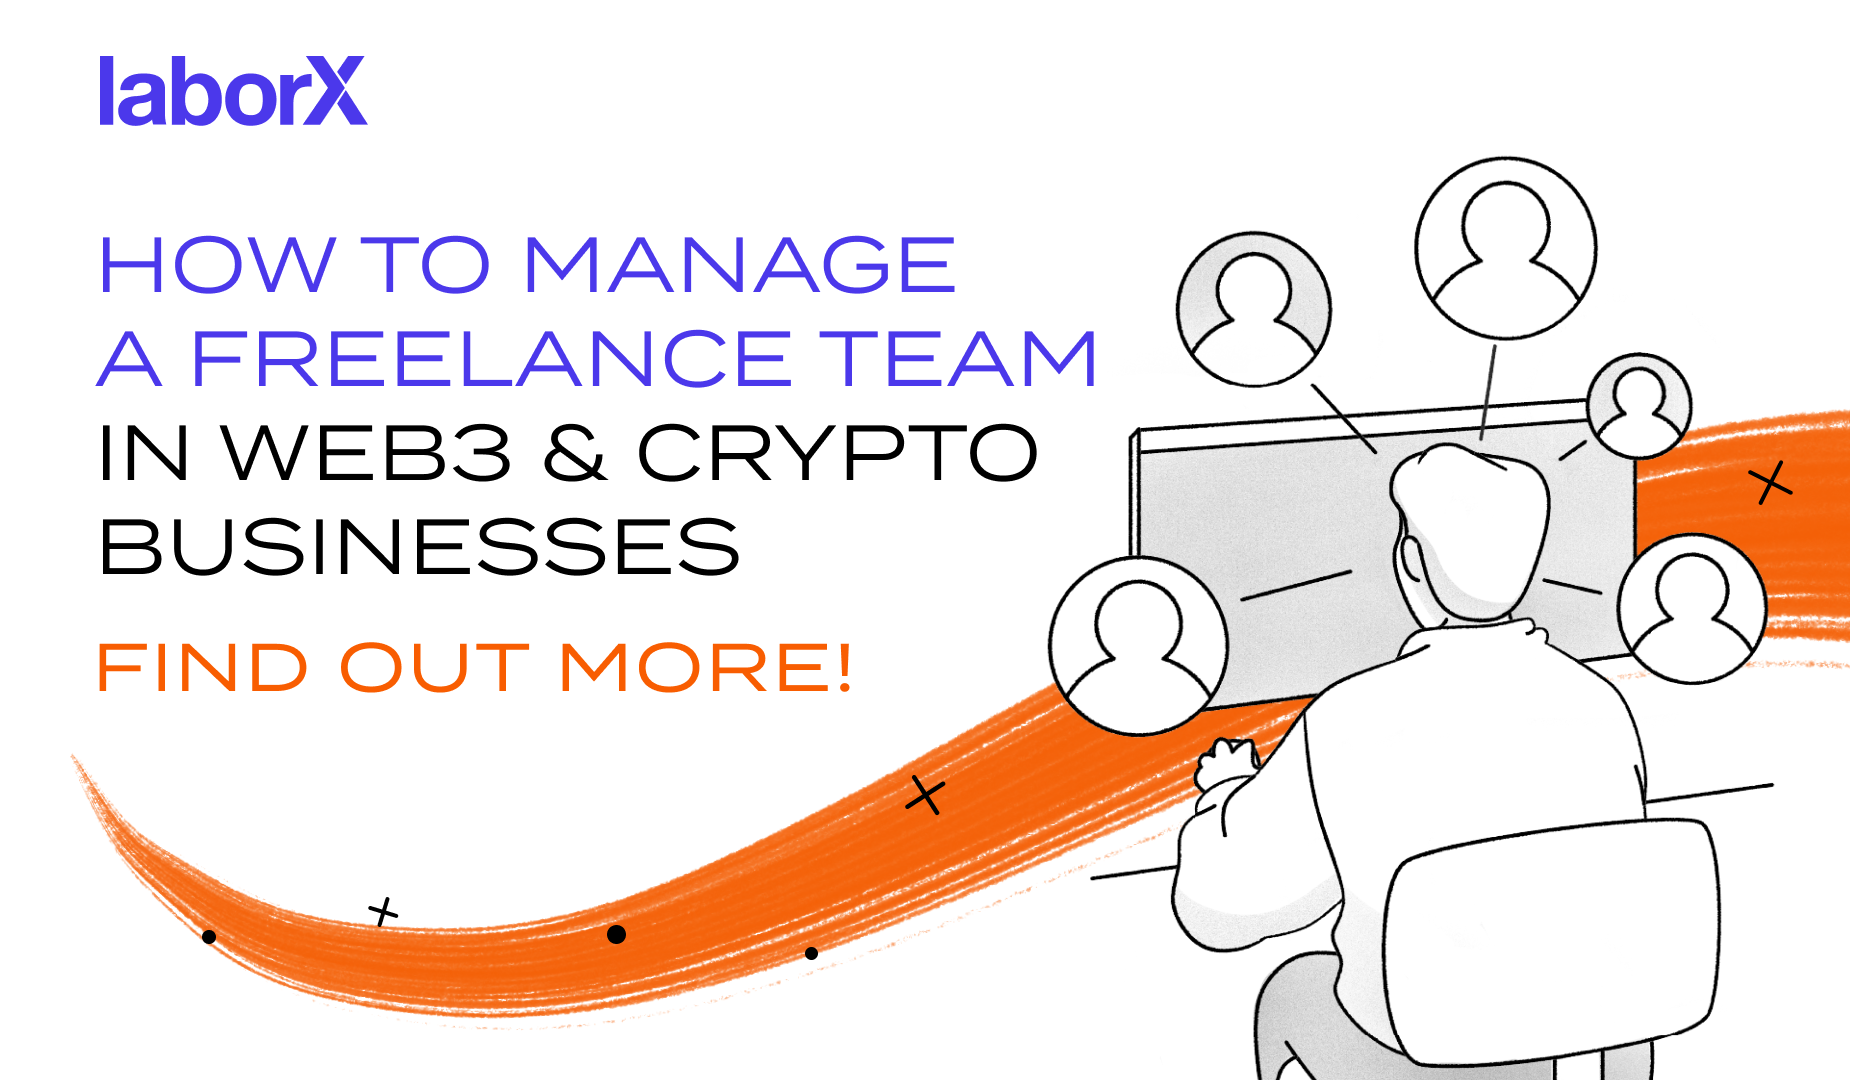 ​What Does It Take To Manage A Freelance Team In A Web3 Business?